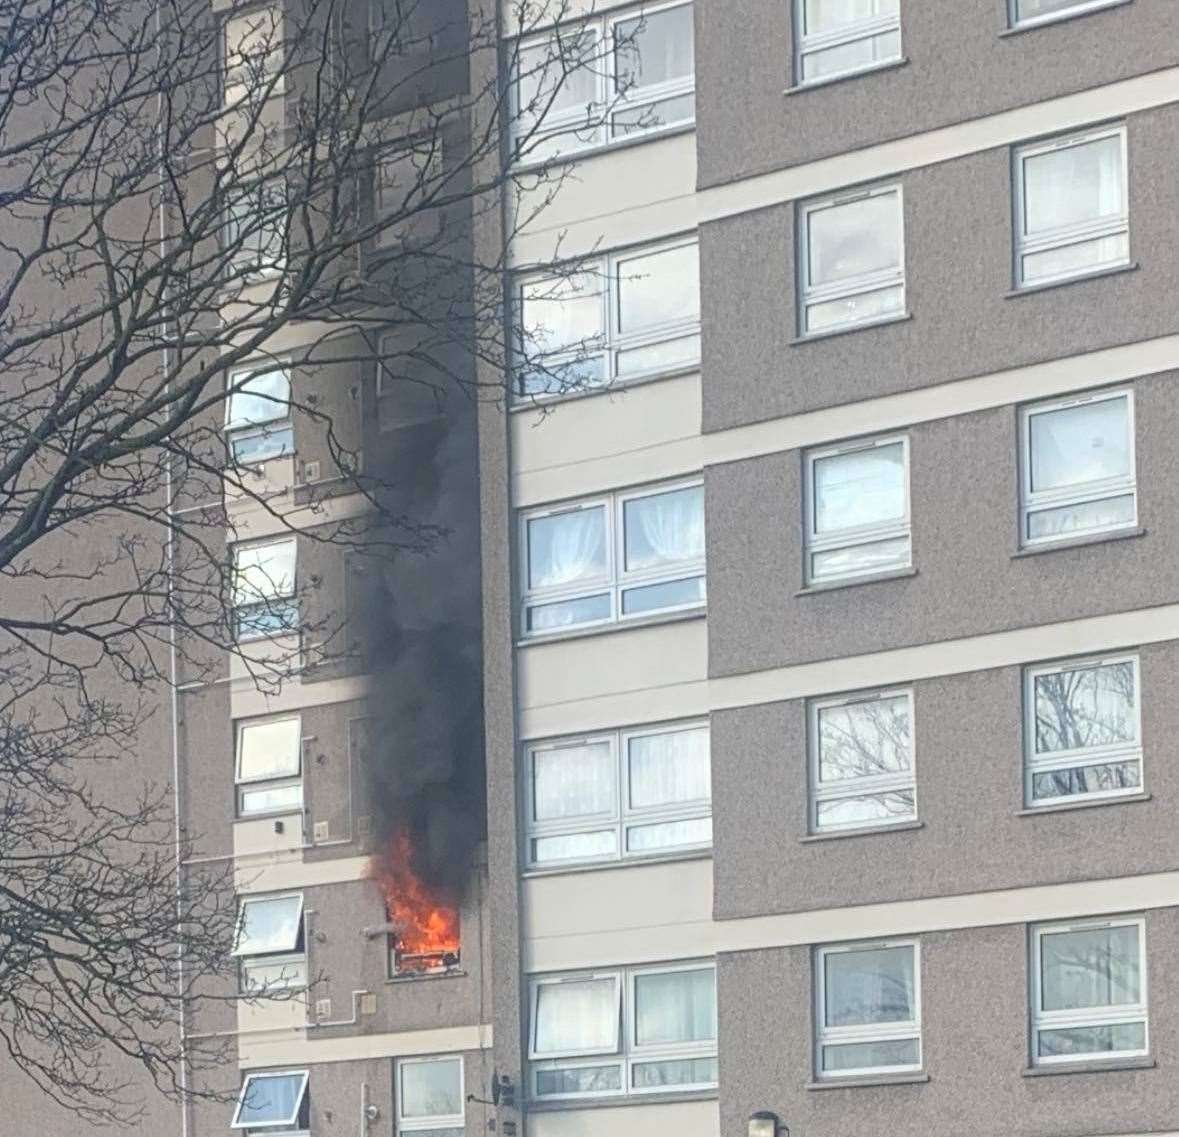 Dramatic pictures show the blaze as it took hold of a block of flats in Erith. Picture: Casey